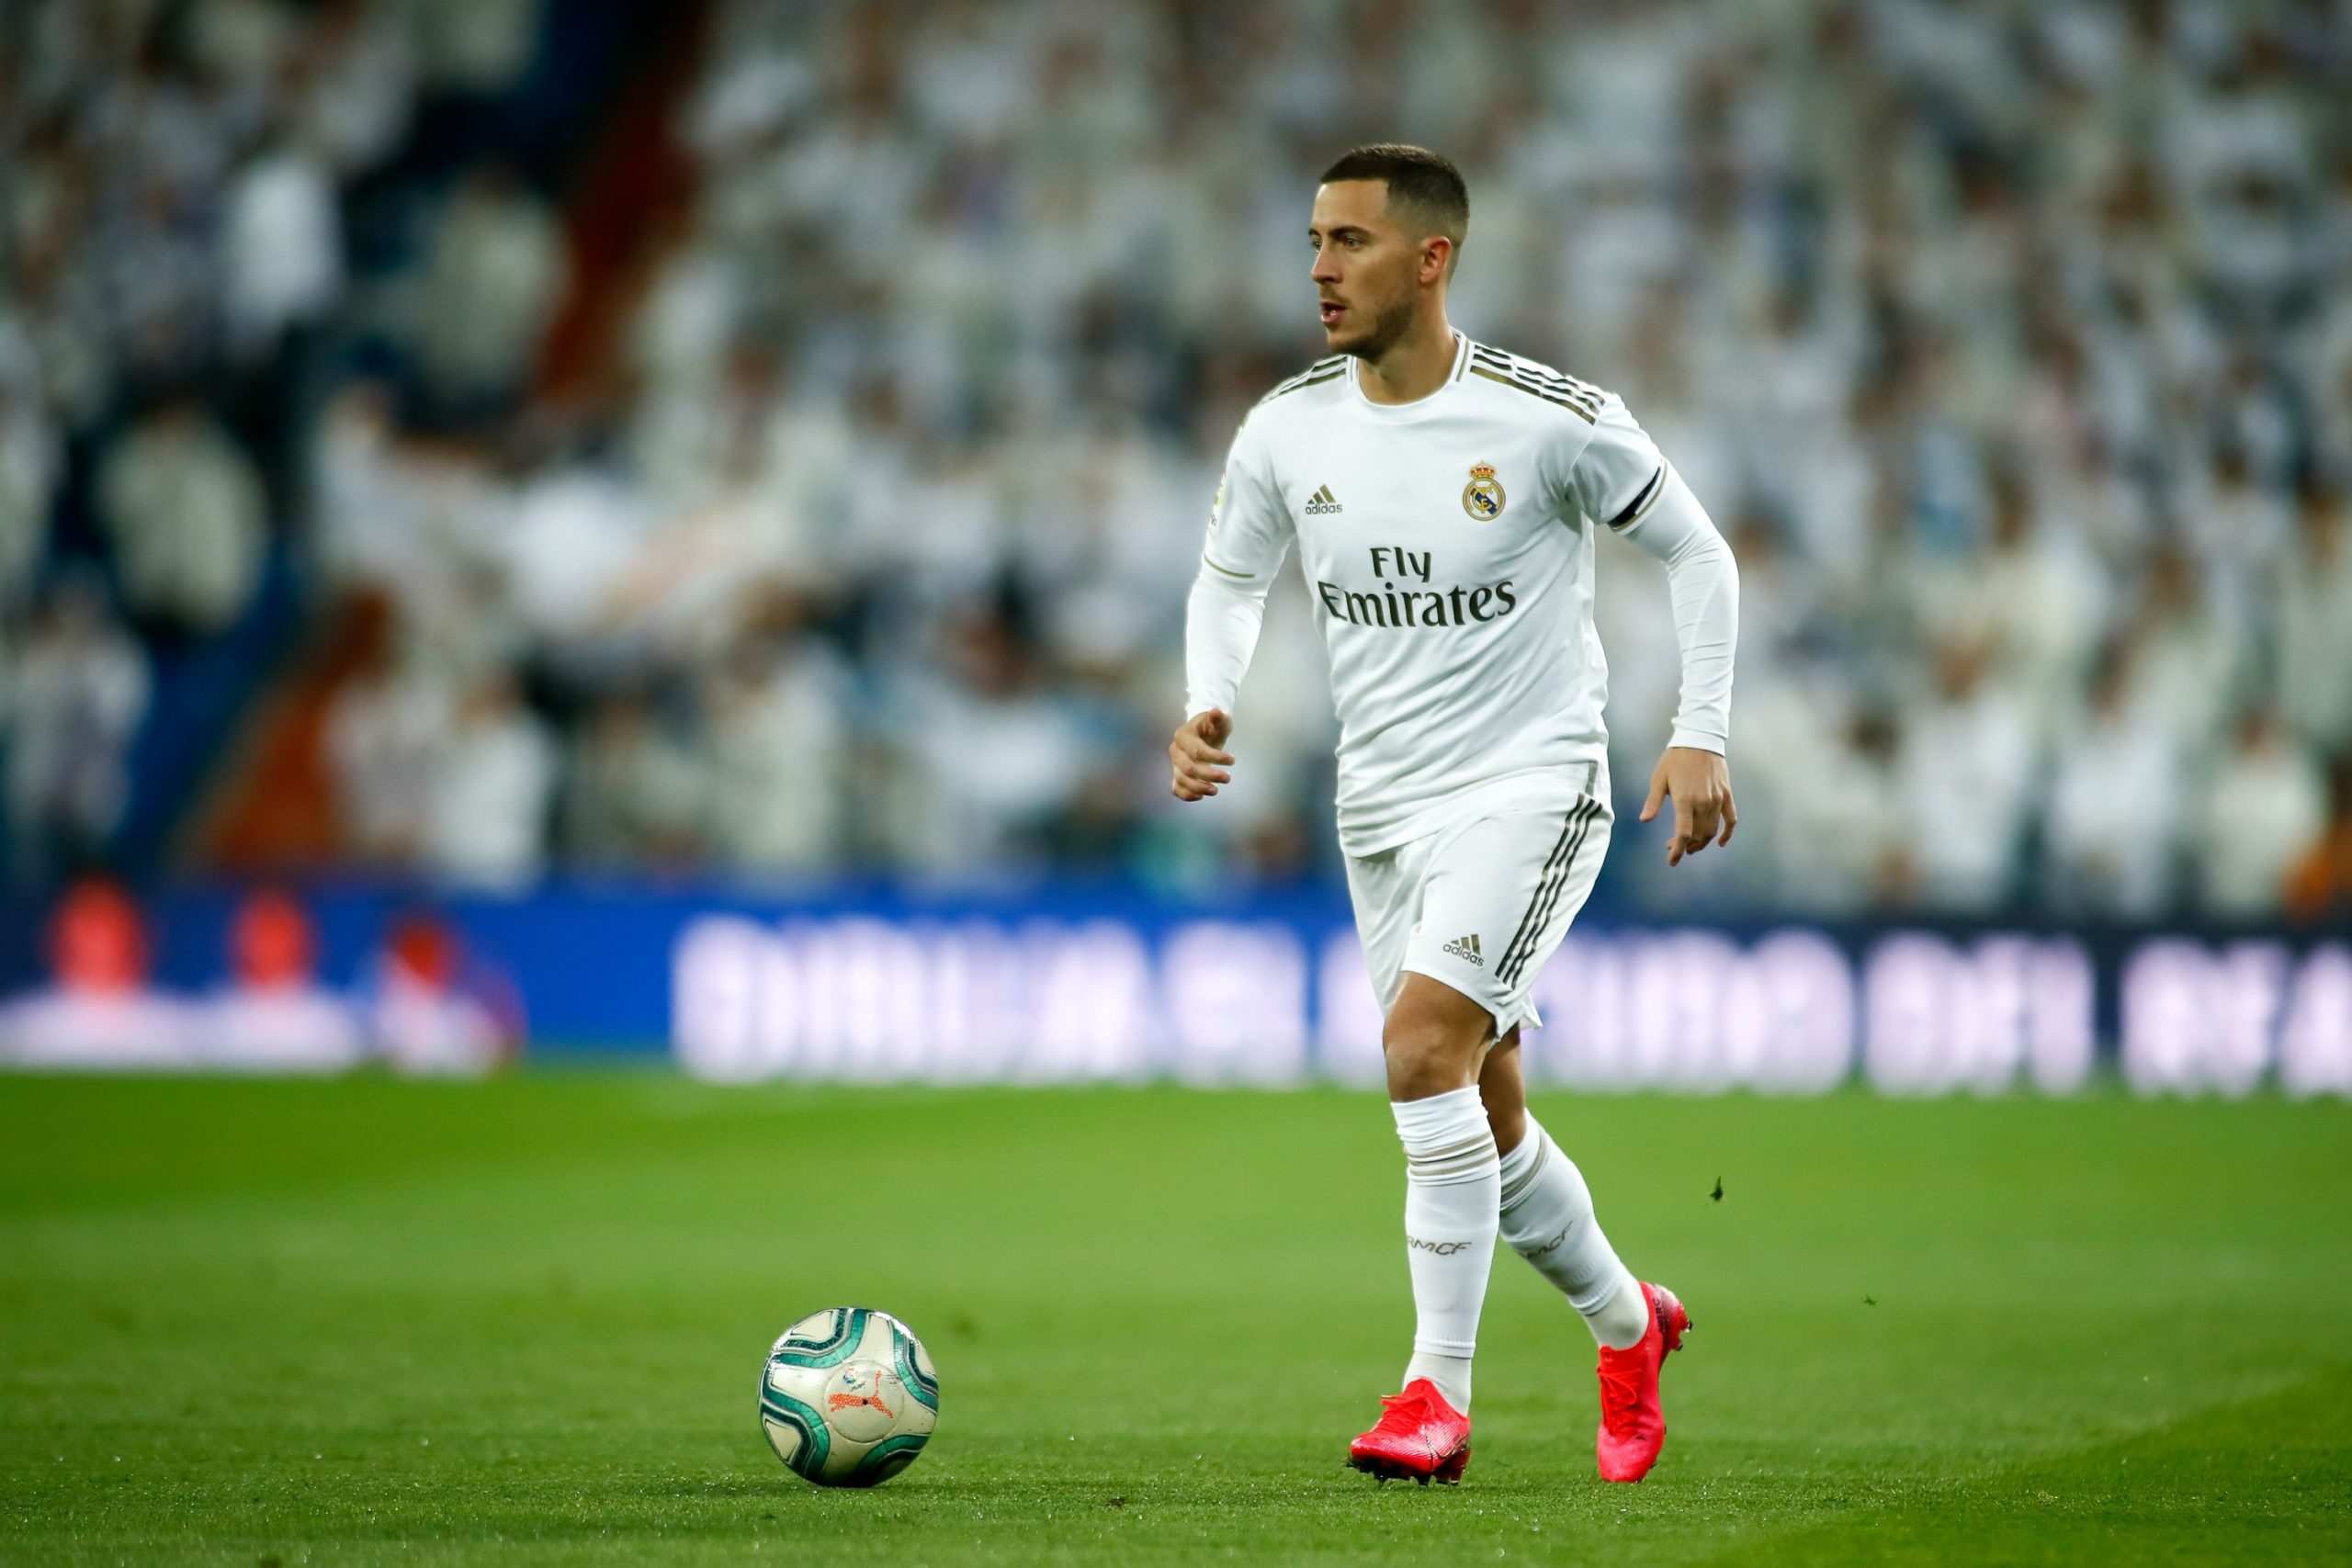 Hazard moved to Real Madrid in 2019